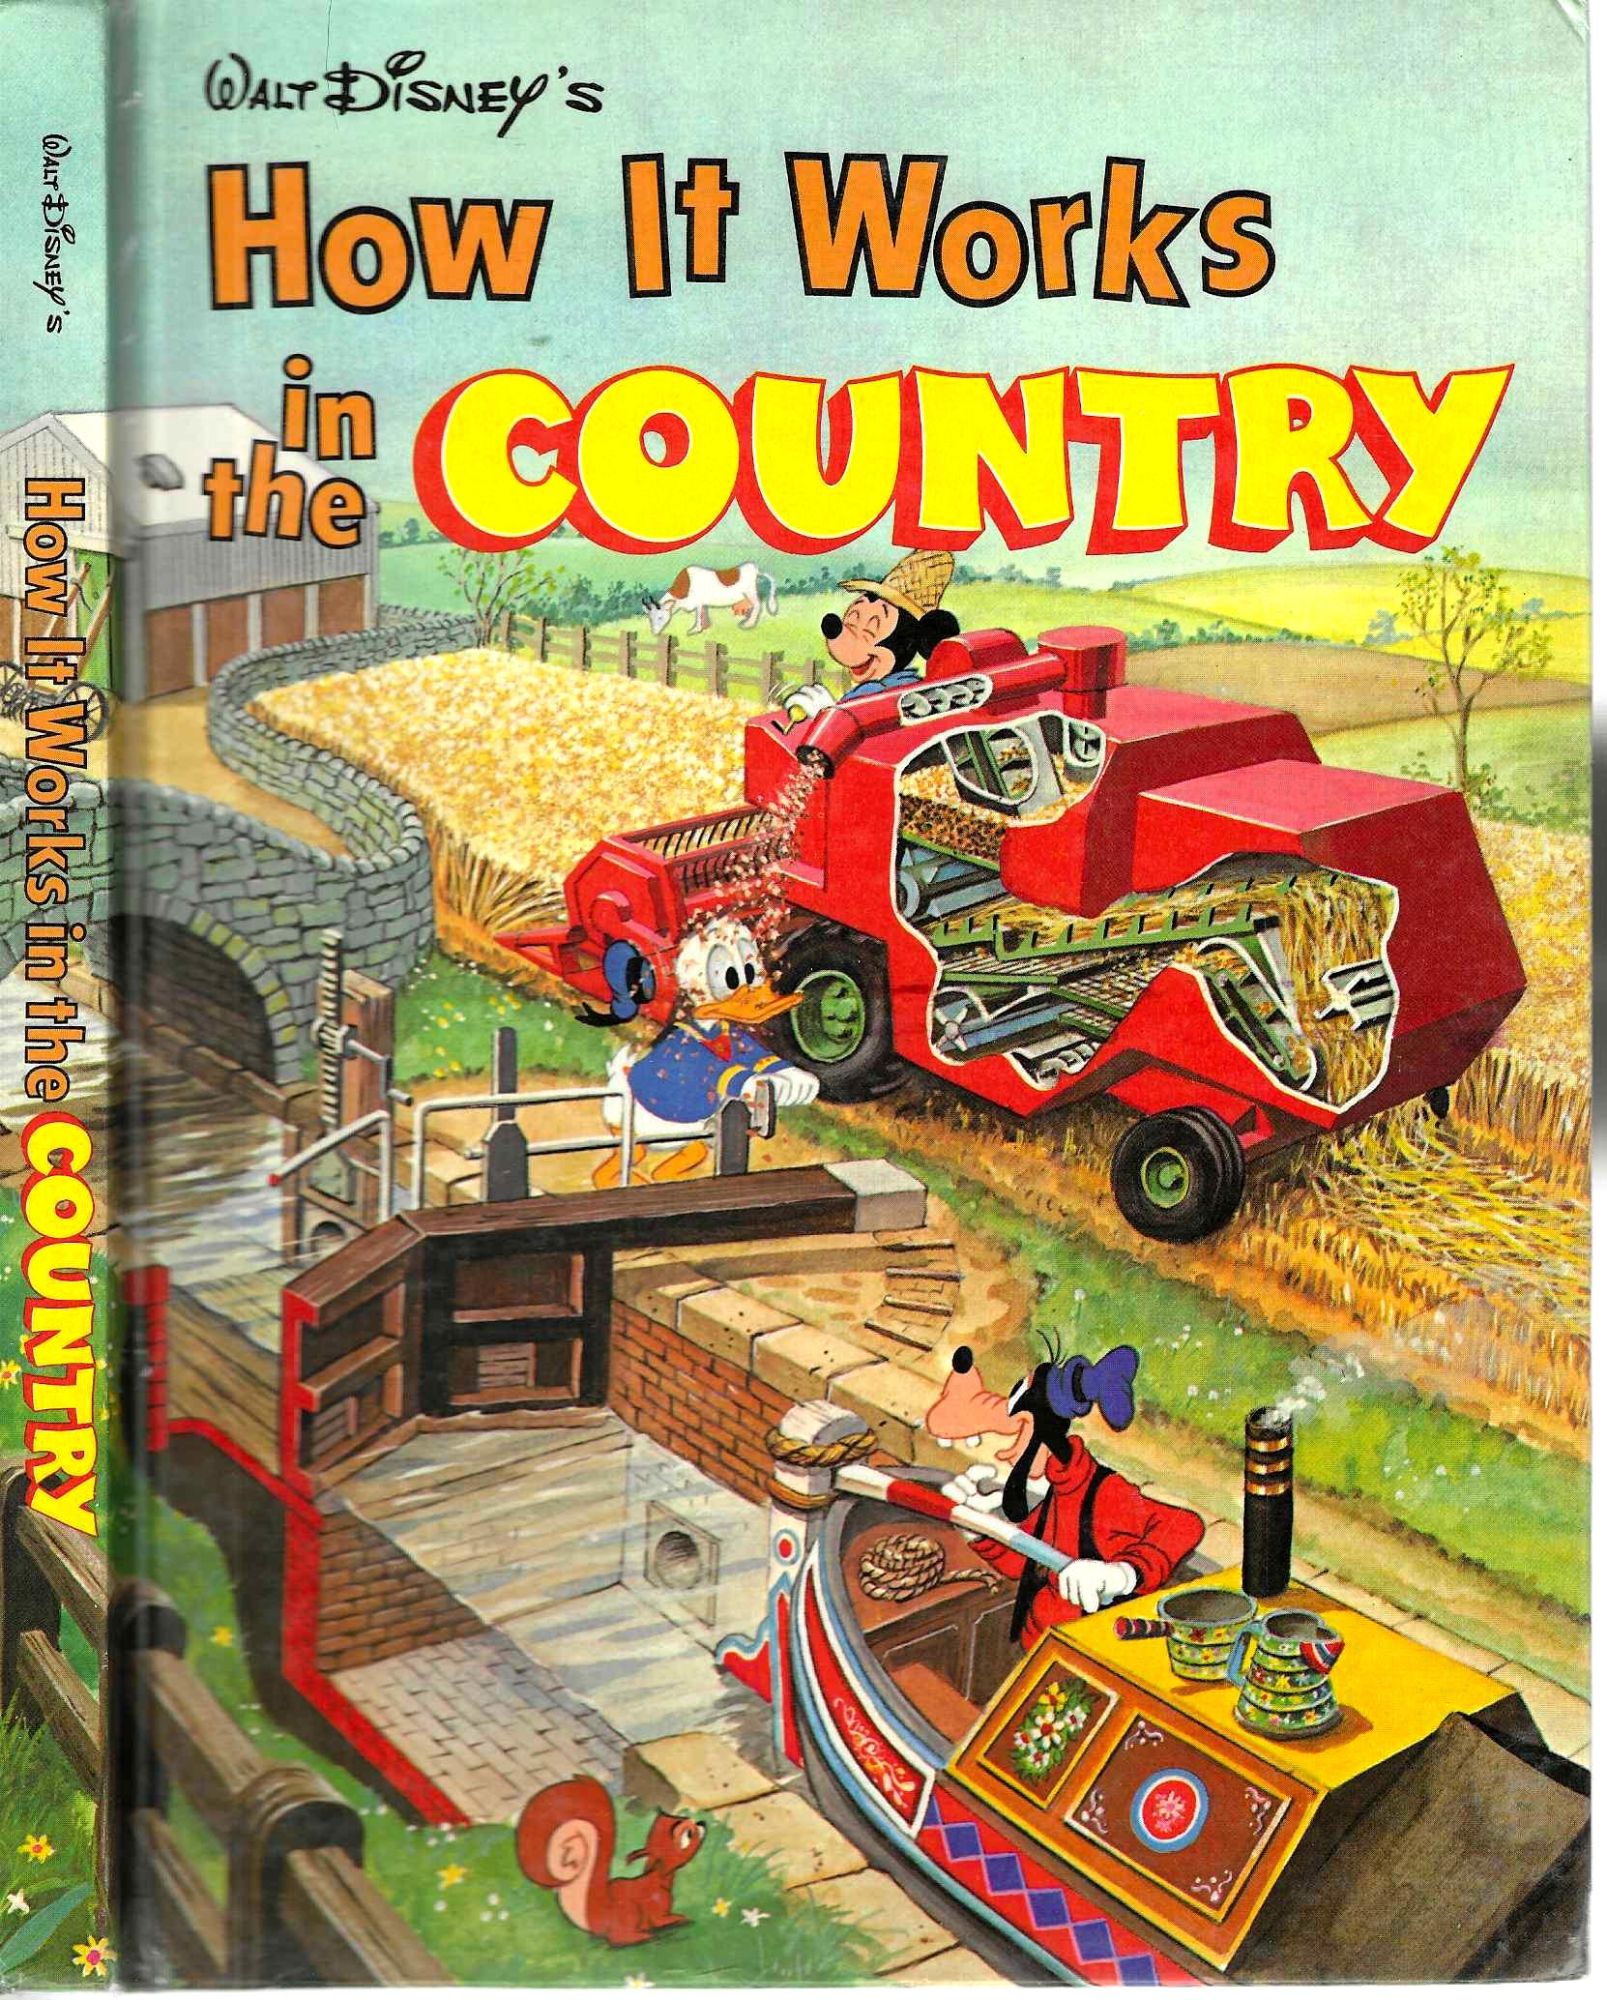 How it Works in The Country by Walt Disney on Black's Bookshop